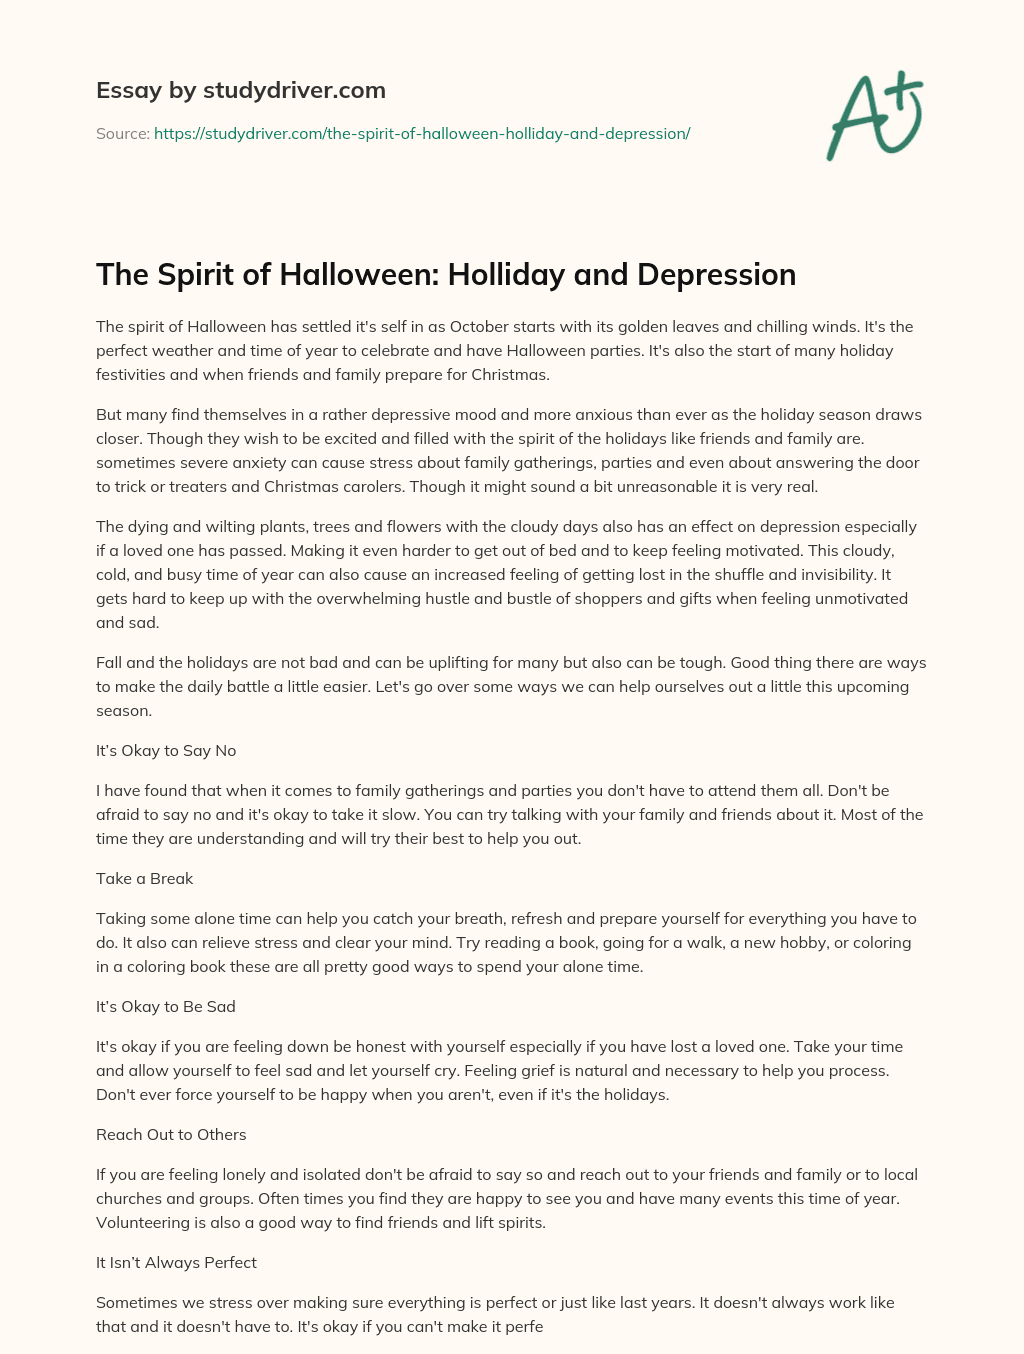 The Spirit of Halloween: Holliday and Depression  essay